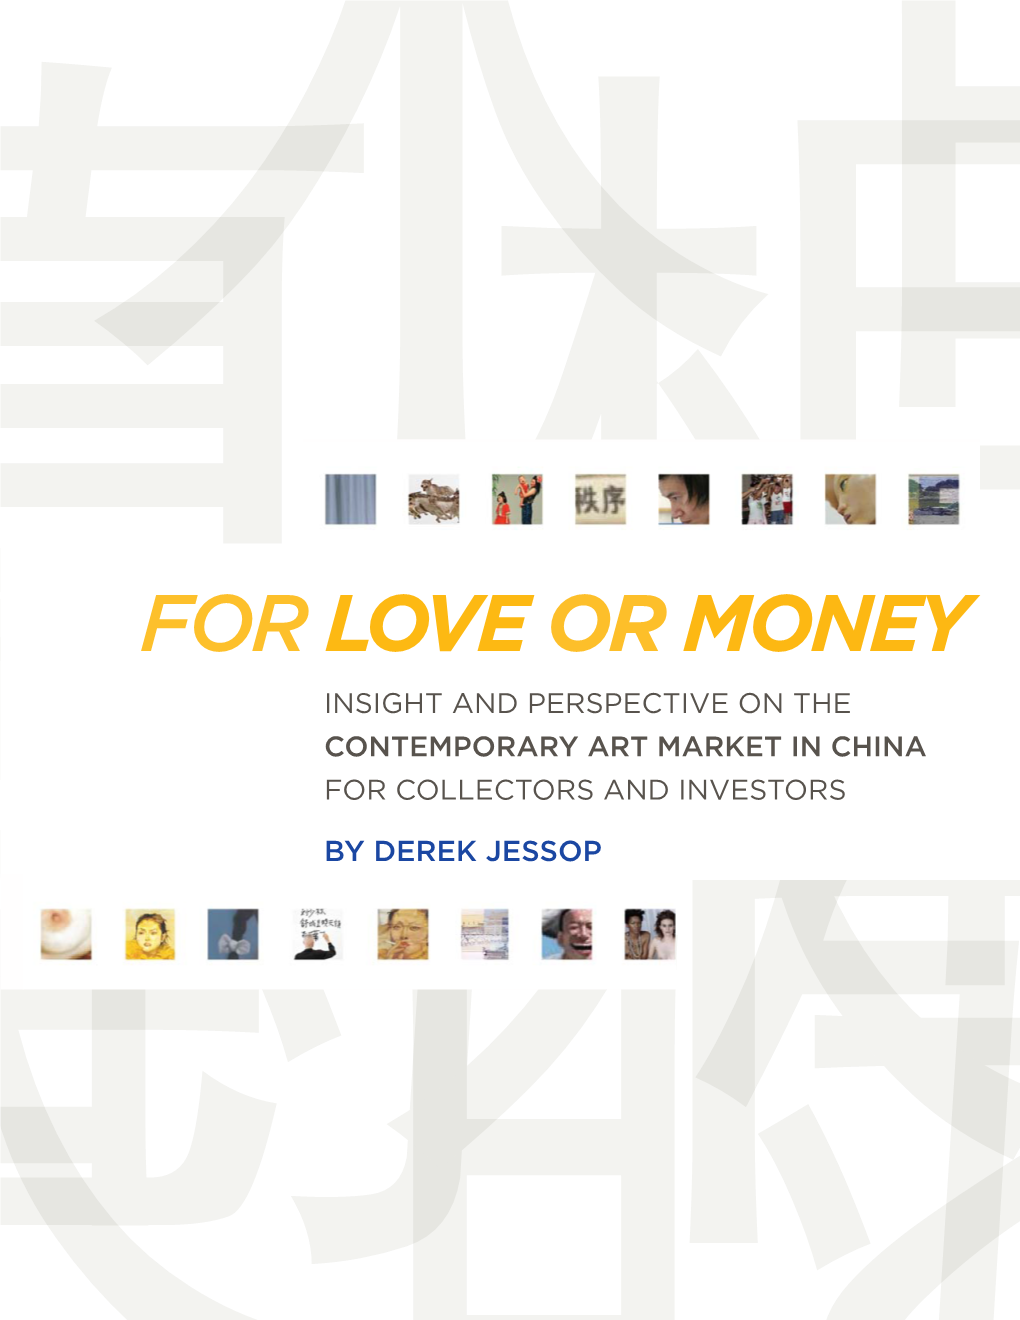 For Love Or Money Insight and Perspective on the Contemporary Art Market in China for Collectors and Investors